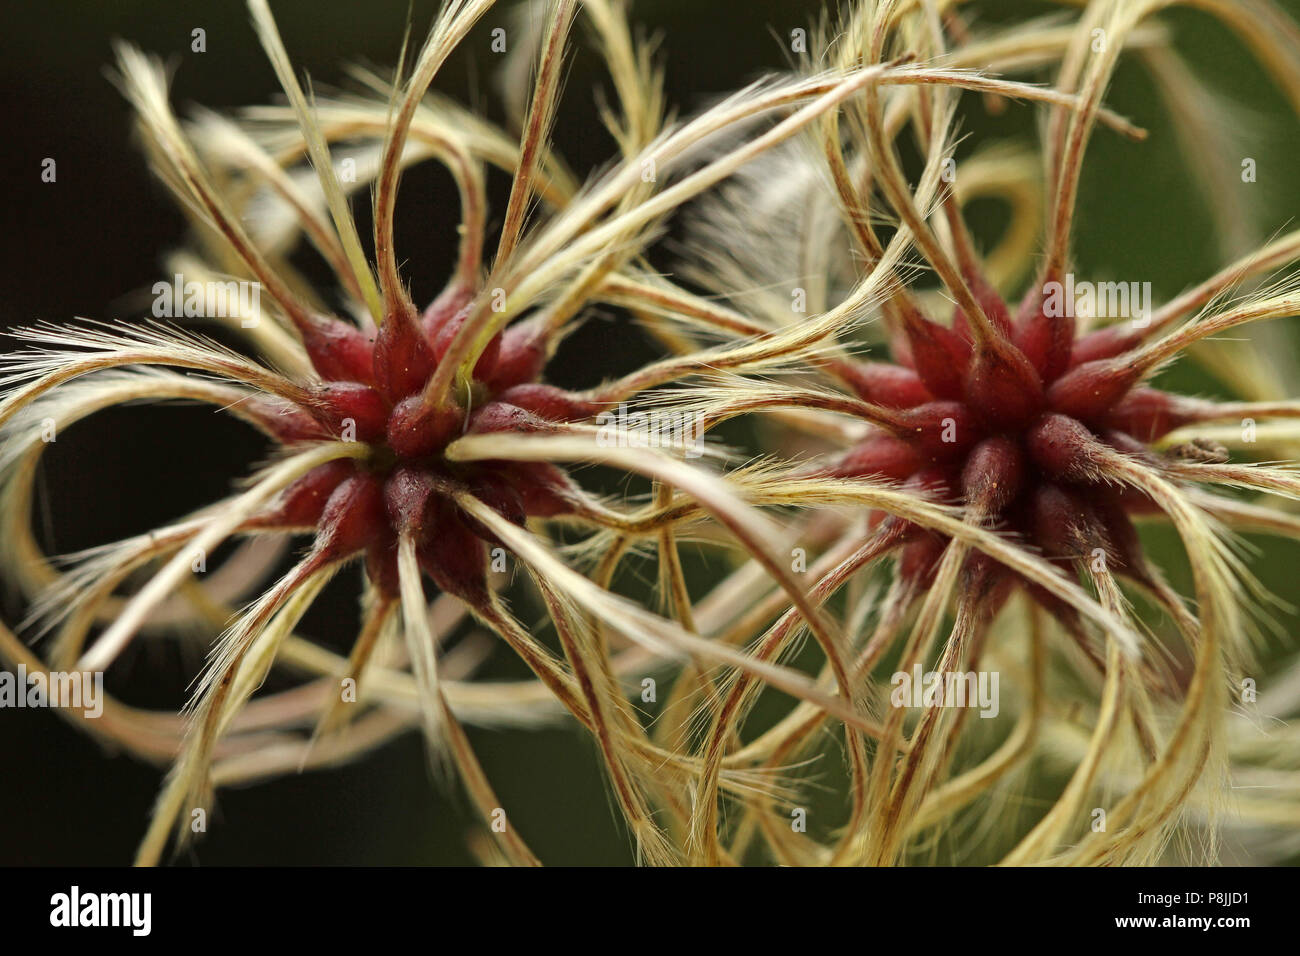 Fruits with fluffy hairs of Traveller's Joy (Clematis vitalba) Stock Photo